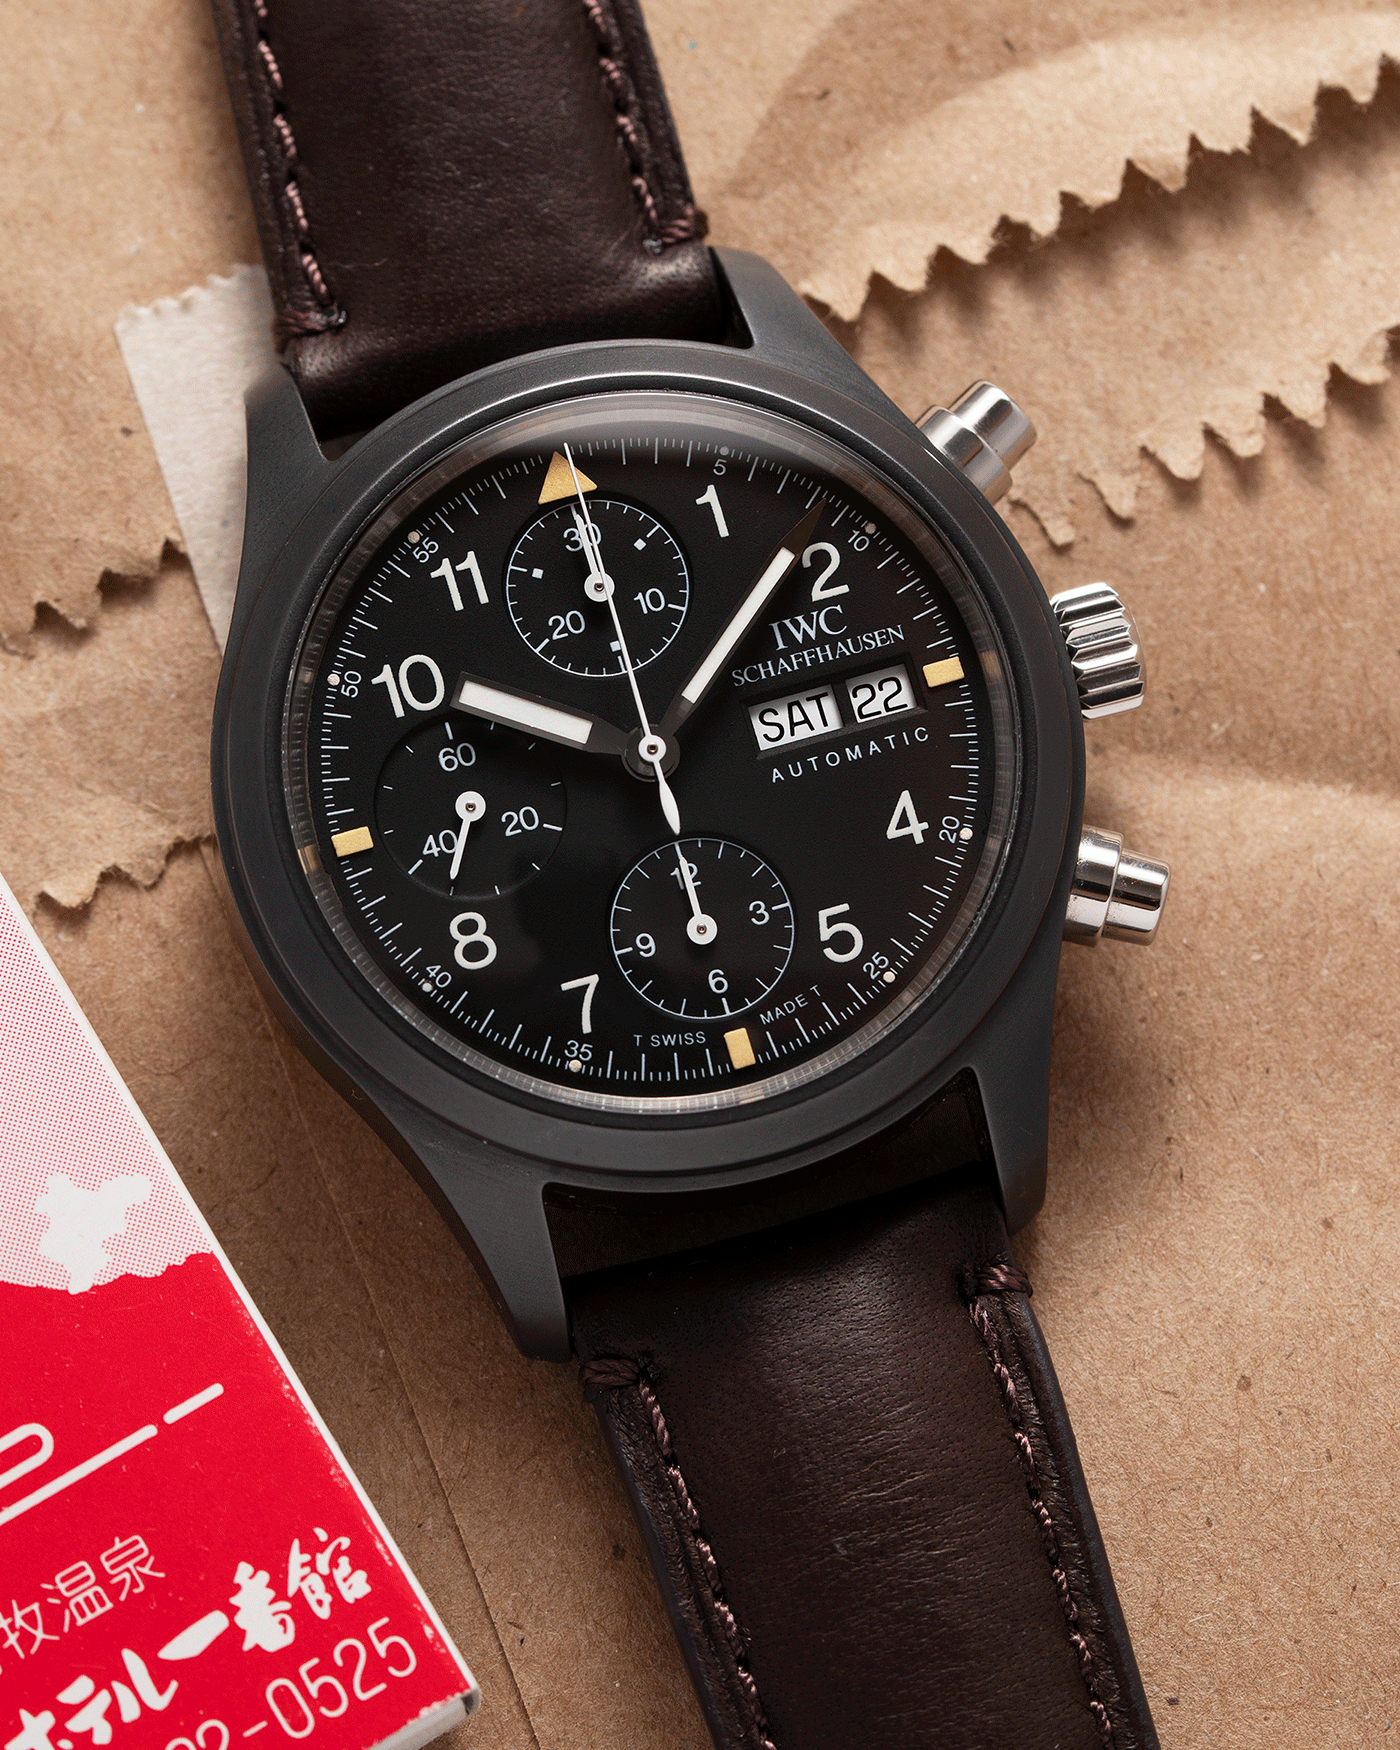  Brand: IWC Year: 1990s Model: Ceramic Fliegerchronograph Reference Number: 3705 Material: Ceramic and Stainless Steel Movement: Valjoux cal. 7750 Case Diameter: 39mm Bracelet/Strap: Rhein Fils Dark Brown British Lamb Strap with Stainless Steel IWC Tang Buckle